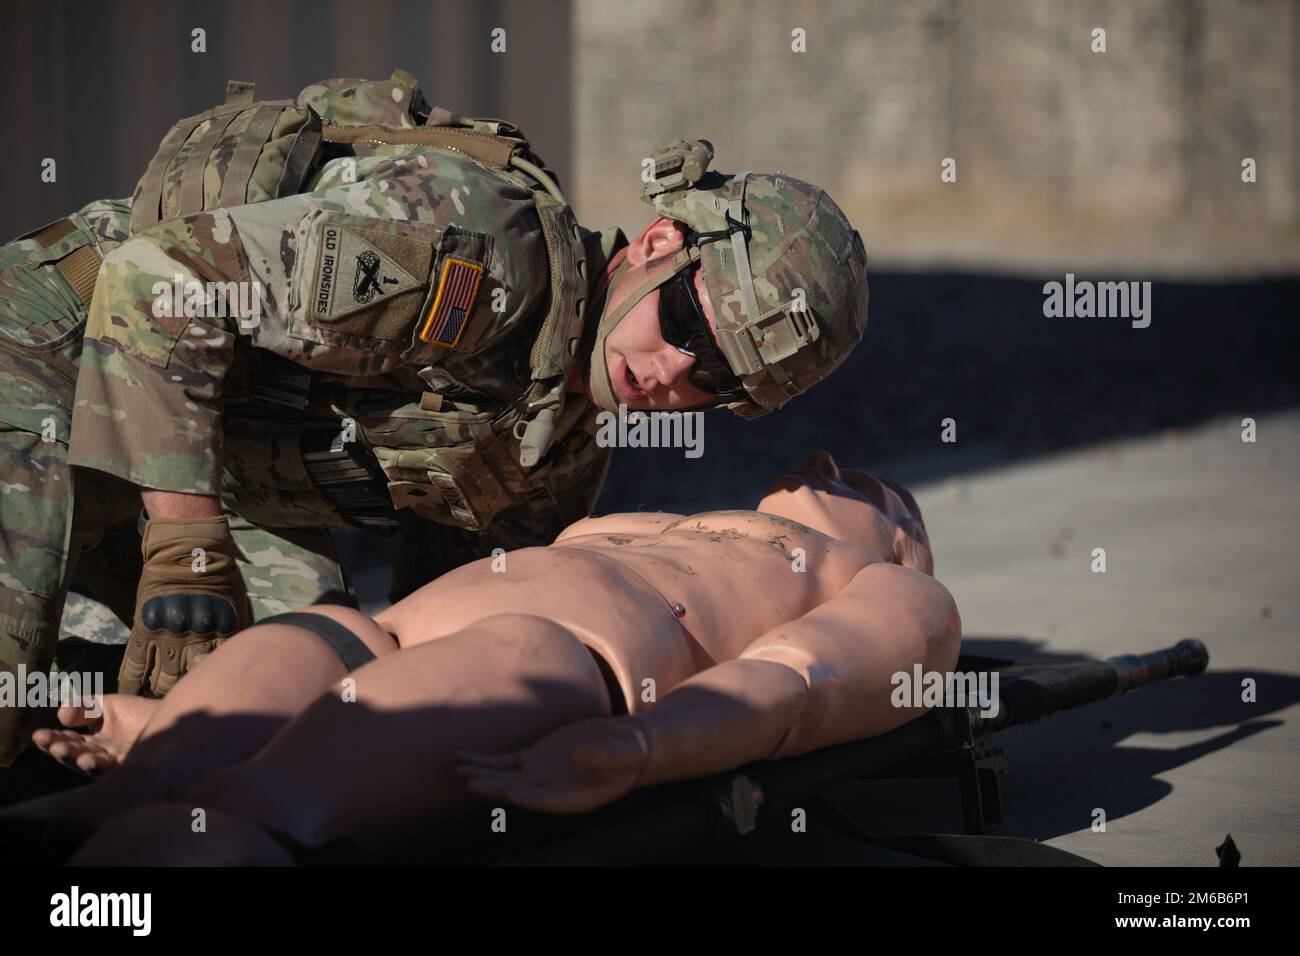 Spc. Jason Yoder, Headquarters Headquarters Company, 1st Battalion, 6th Infantry Regiment, checks his casualty for wounds as part of the nine-line medevac lane in the 1st Armored Division Iron Squad competition, April 22, 2022, on Fort Bliss, Texas. The Iron Squad Competition is a four-day event designed to test each squad and individual competitor’s physical stamina, Warrior Tasks and Battle Drill skills, and military knowledge. The winning squad will advance to compete in the III Corps Best Squad Competition later this year at Fort Hood. Stock Photo